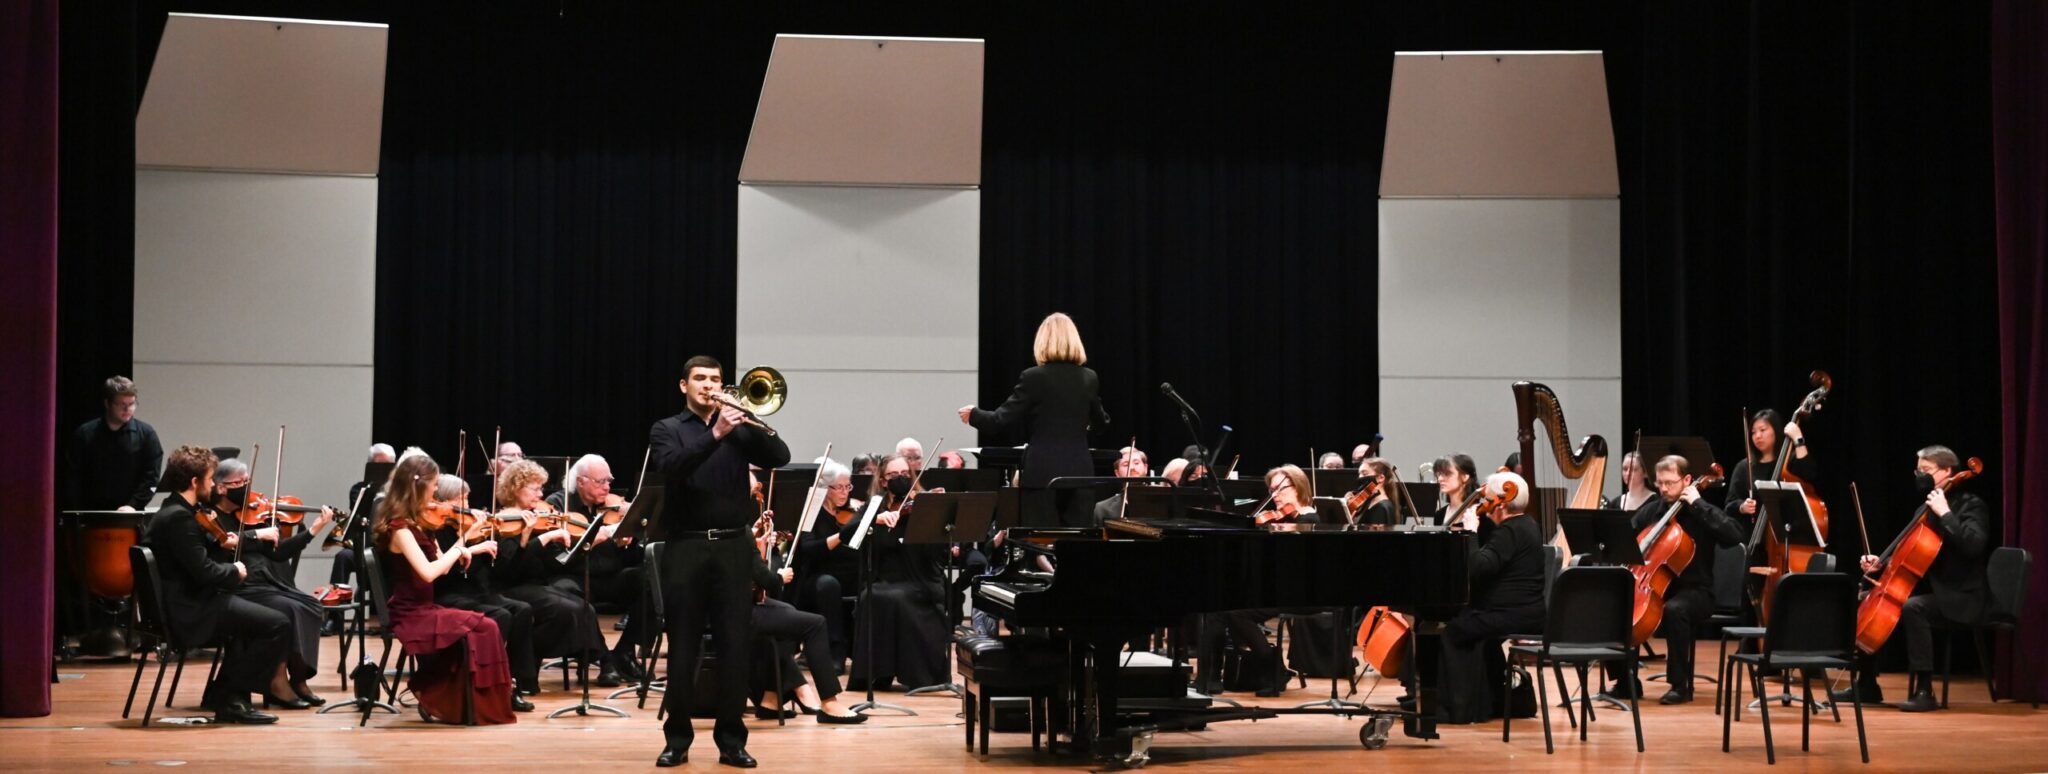 UTC Symphony Orchestra to Perform Fall Concert on November 6 Campus